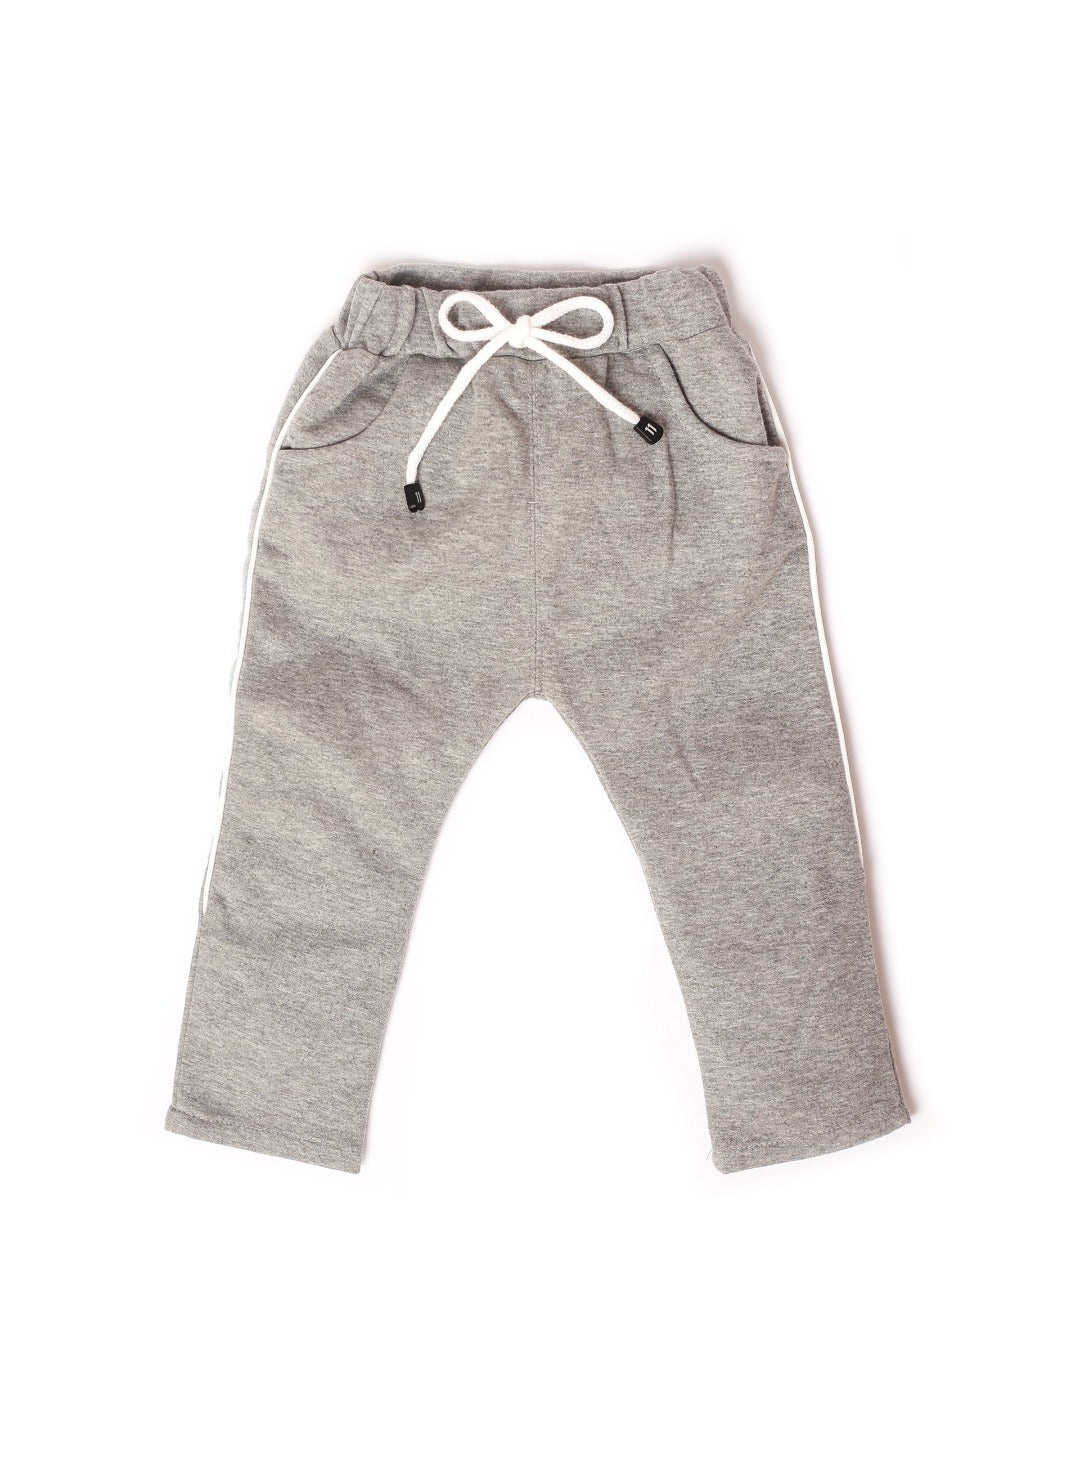 gray stretchable long pants with white string